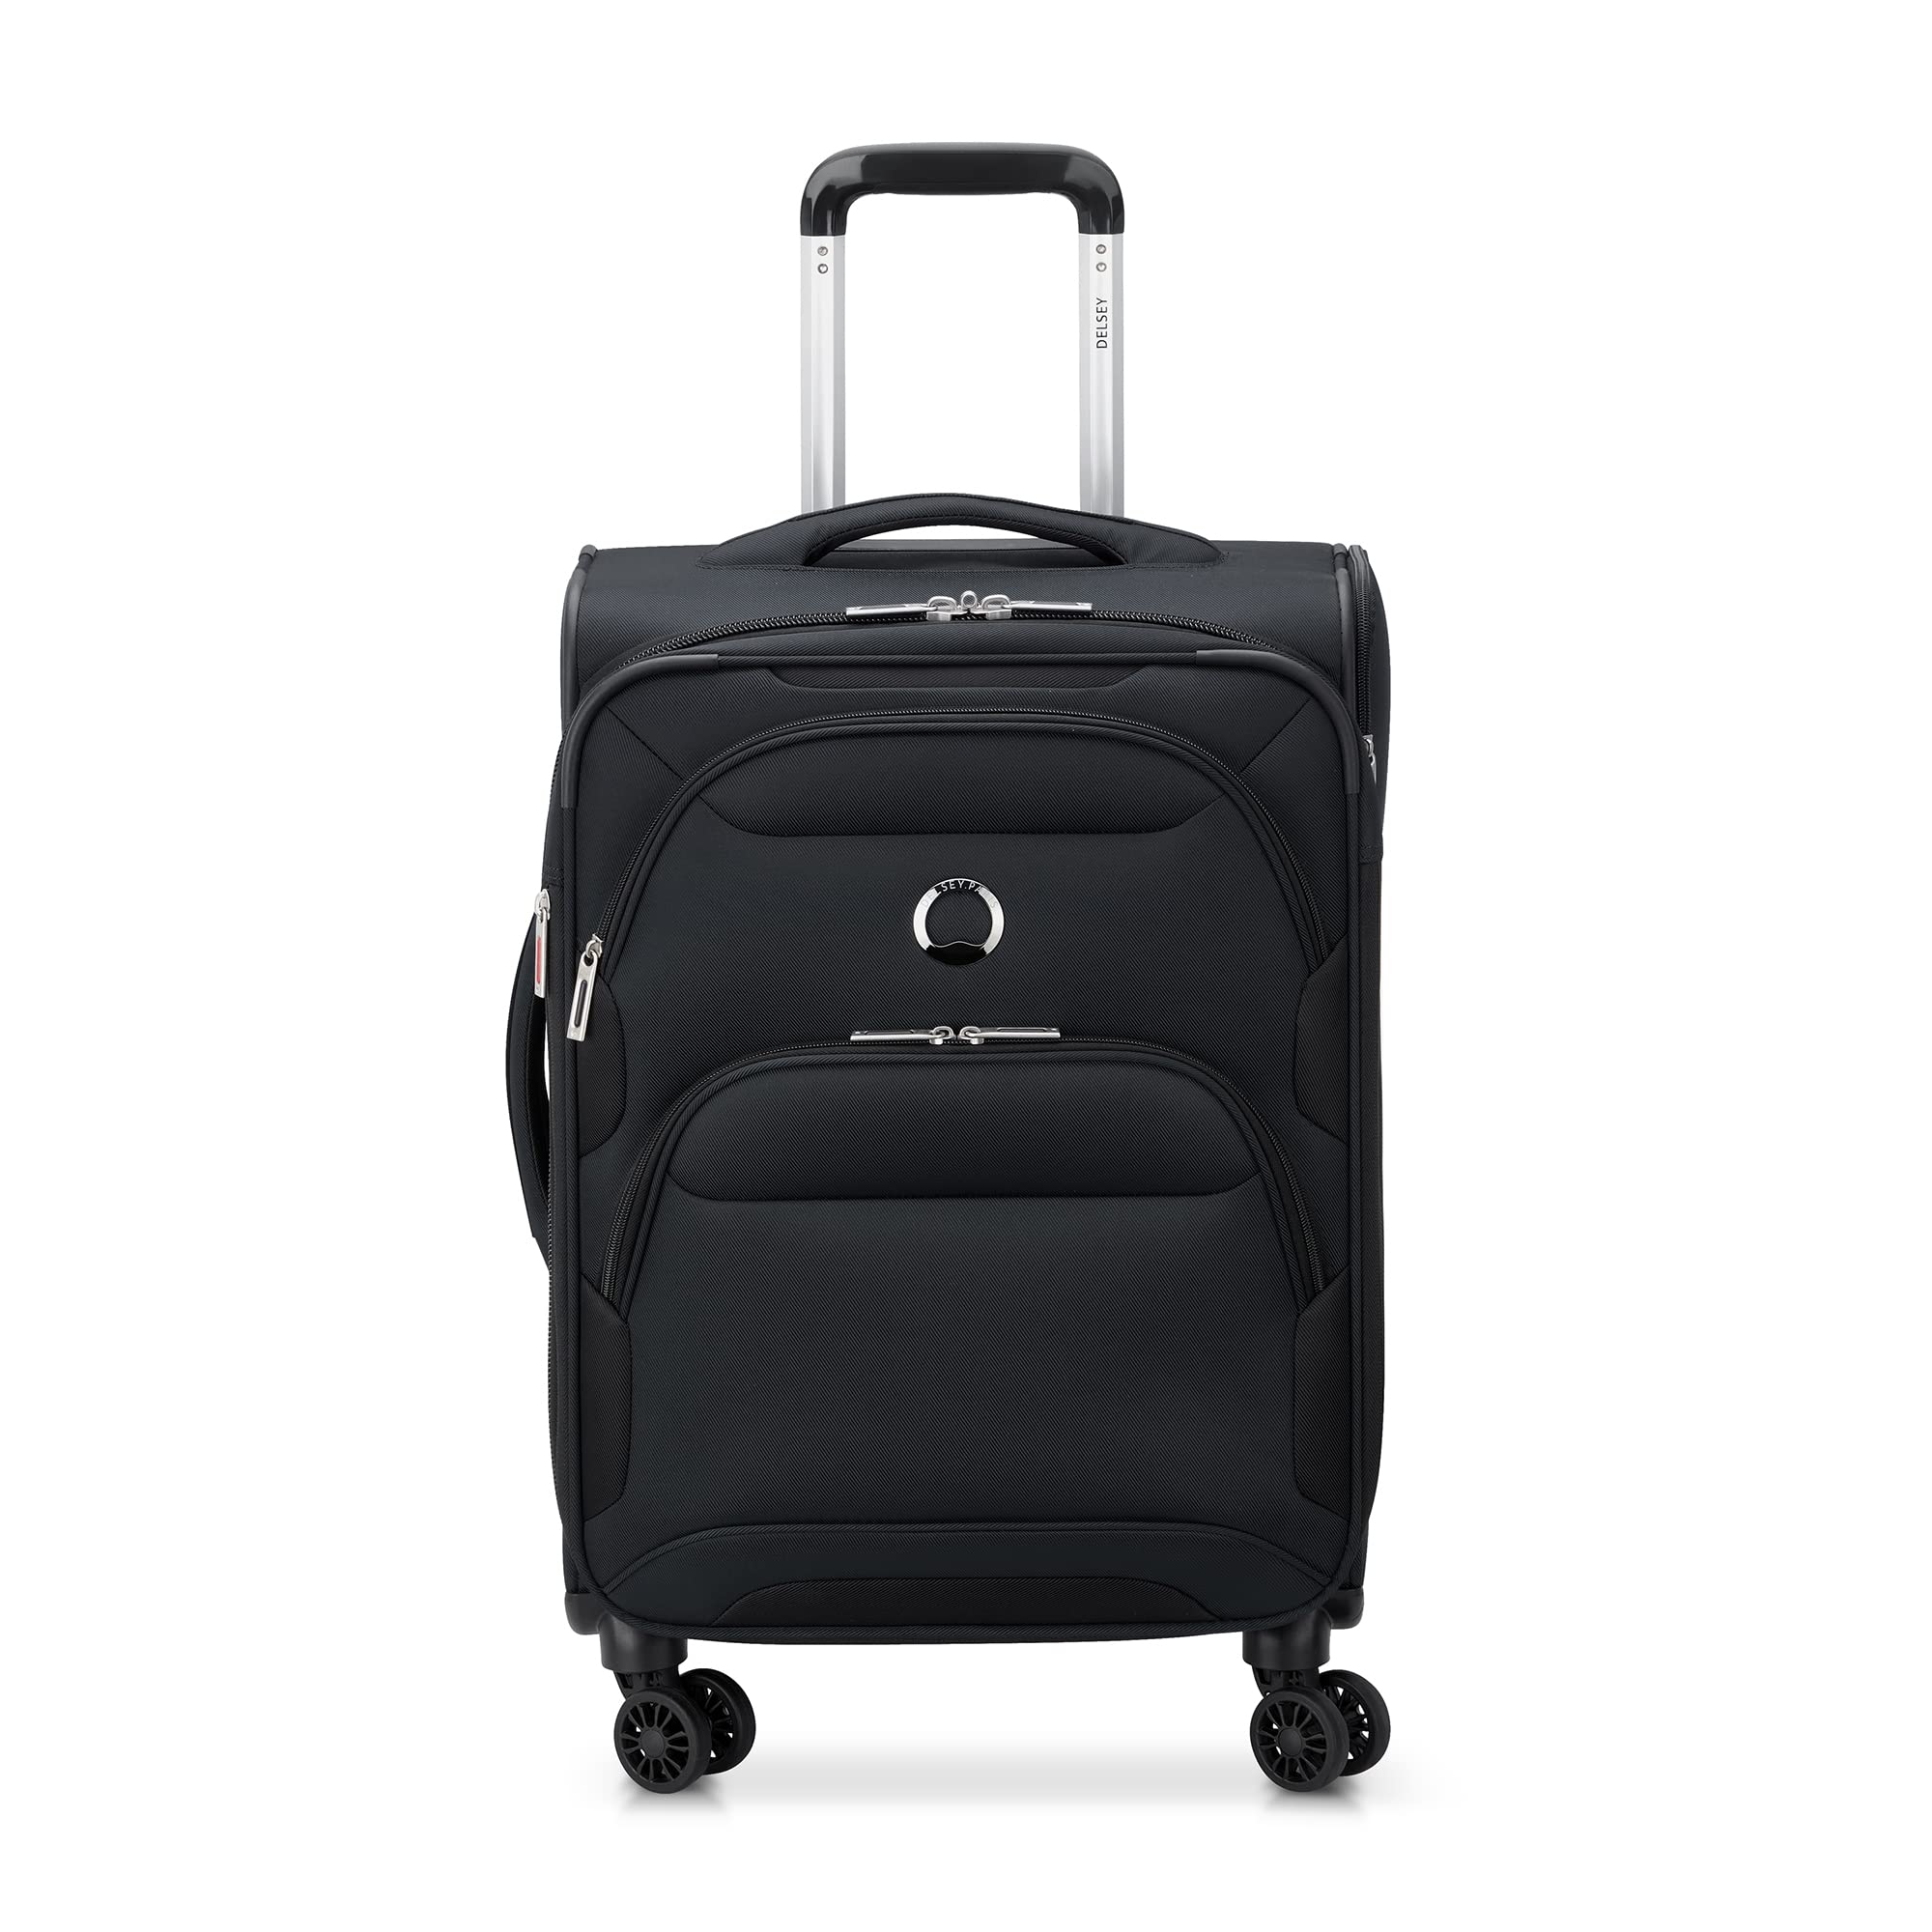 Sky Max 2.0 Softside Expandable Luggage with Spinner Wheels